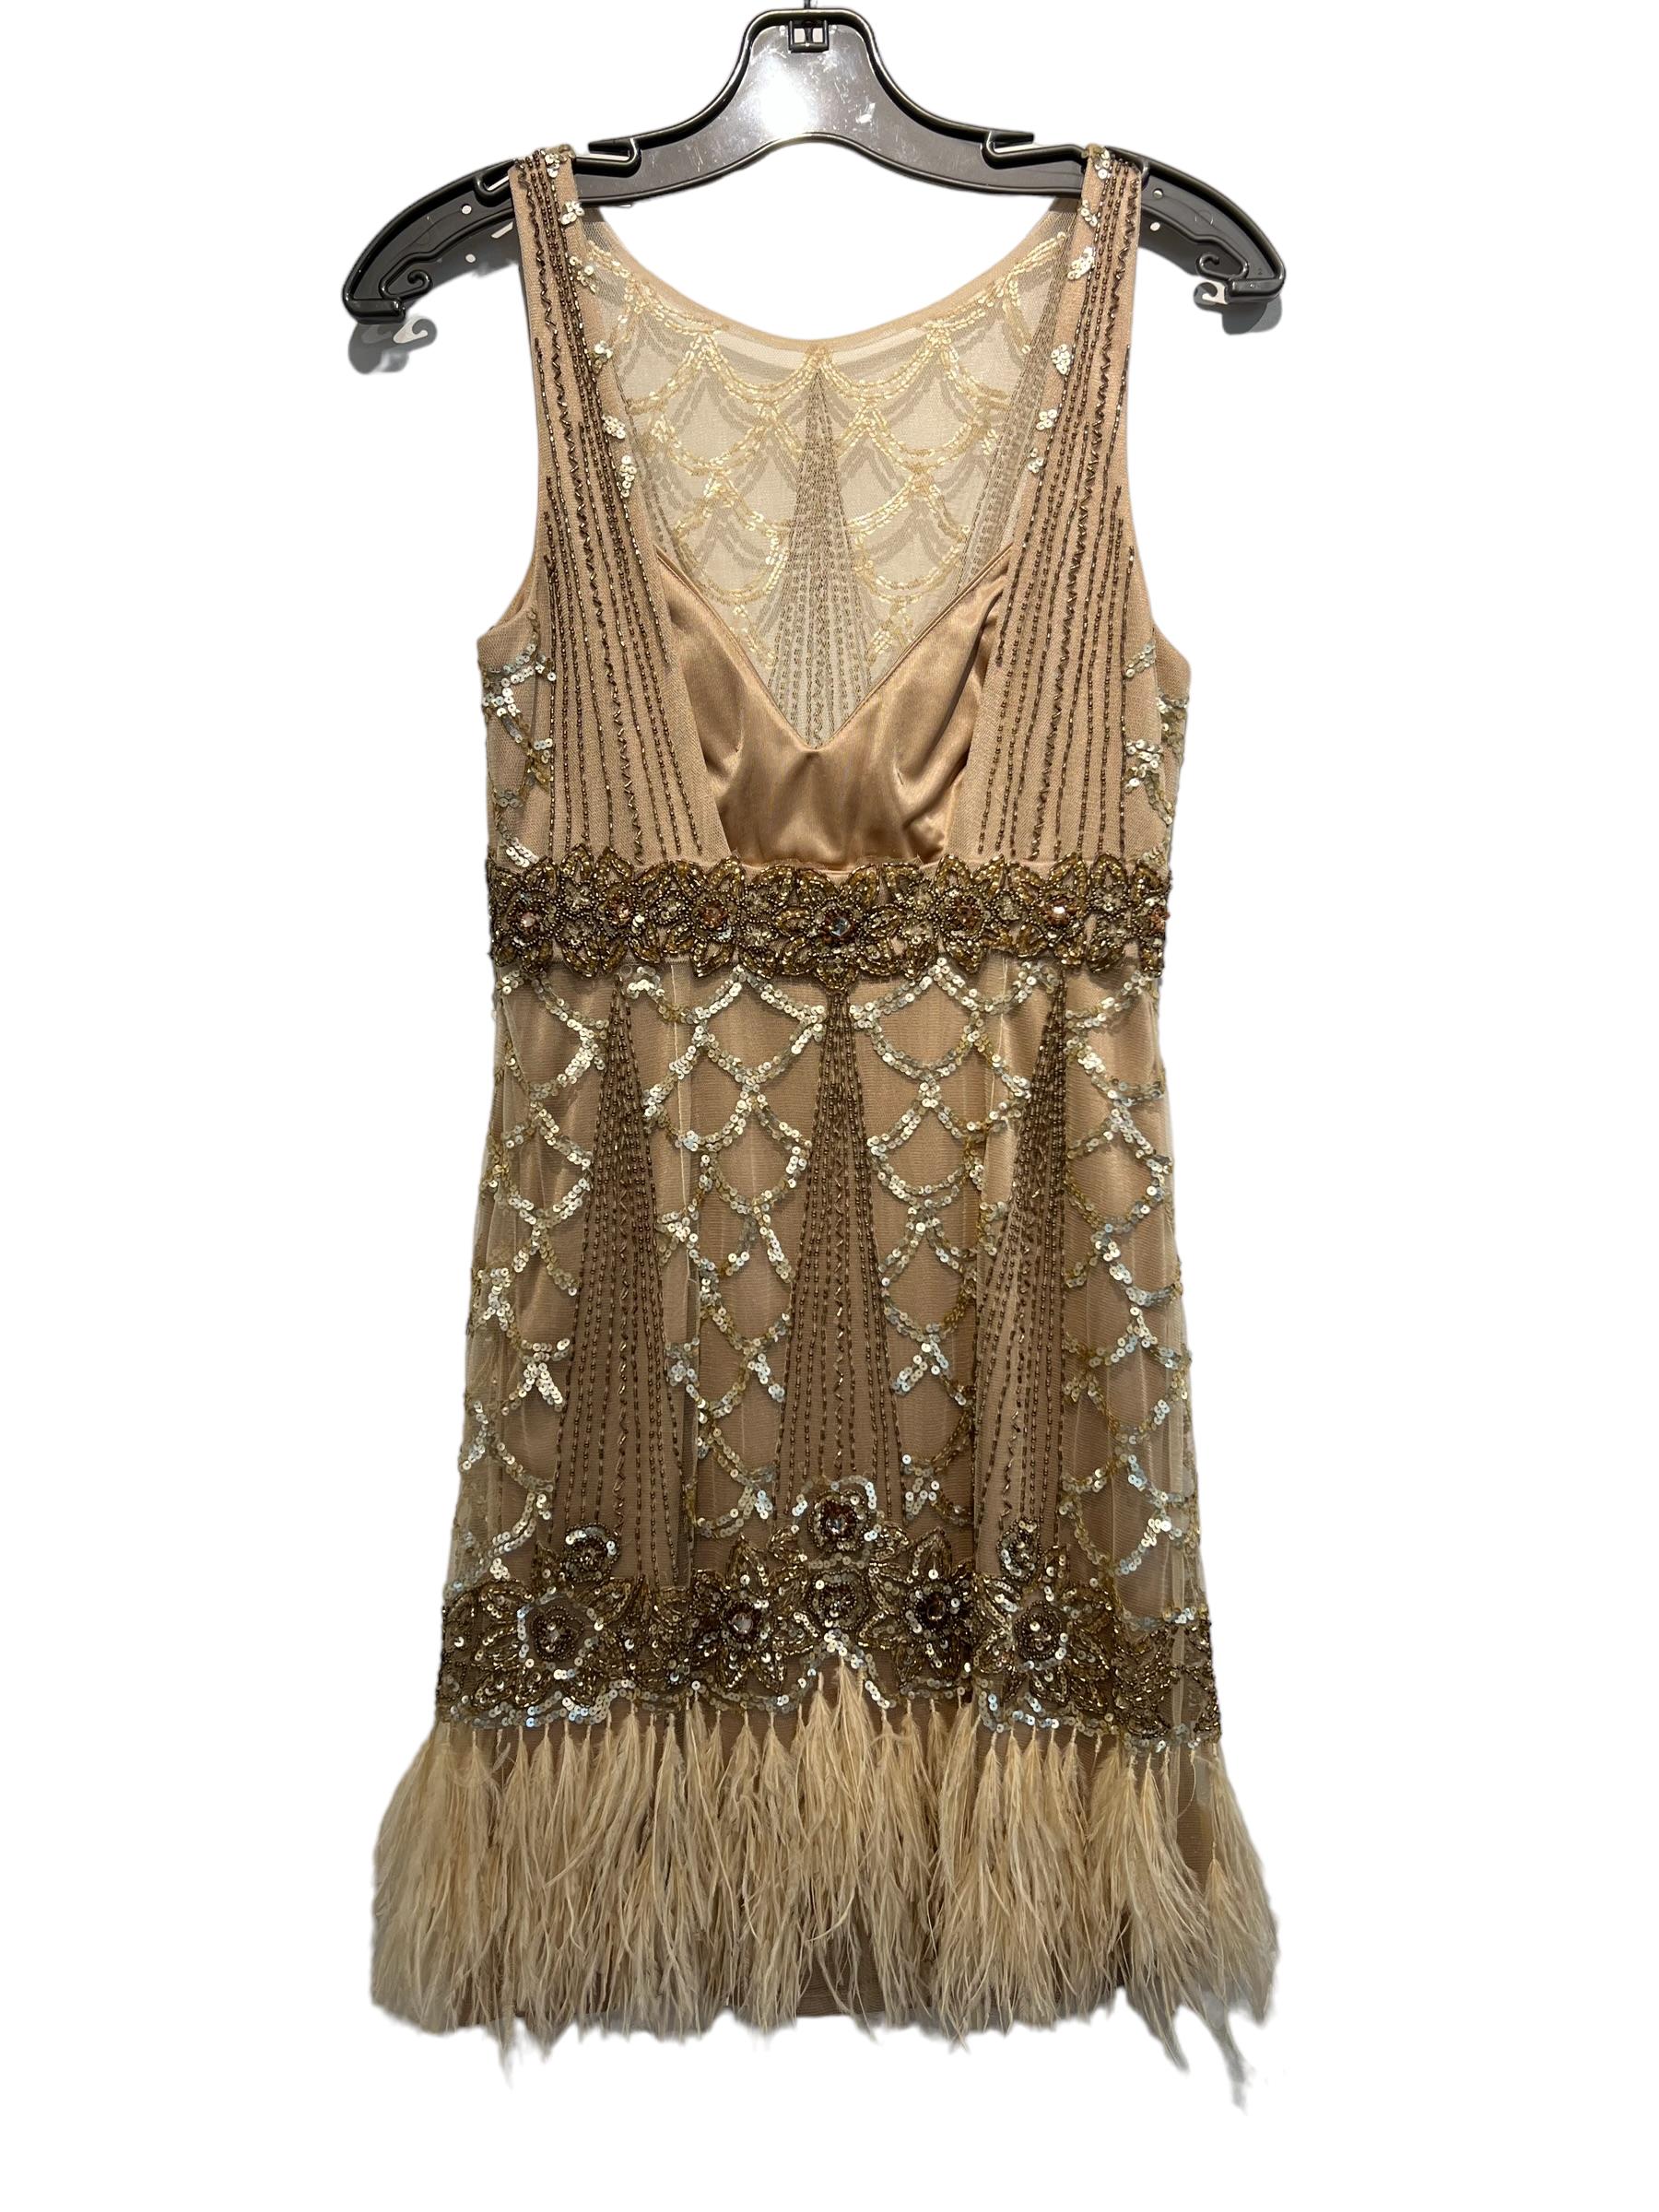 Sue Wang Women´s Beaded with Feathers Dress Size 6 1